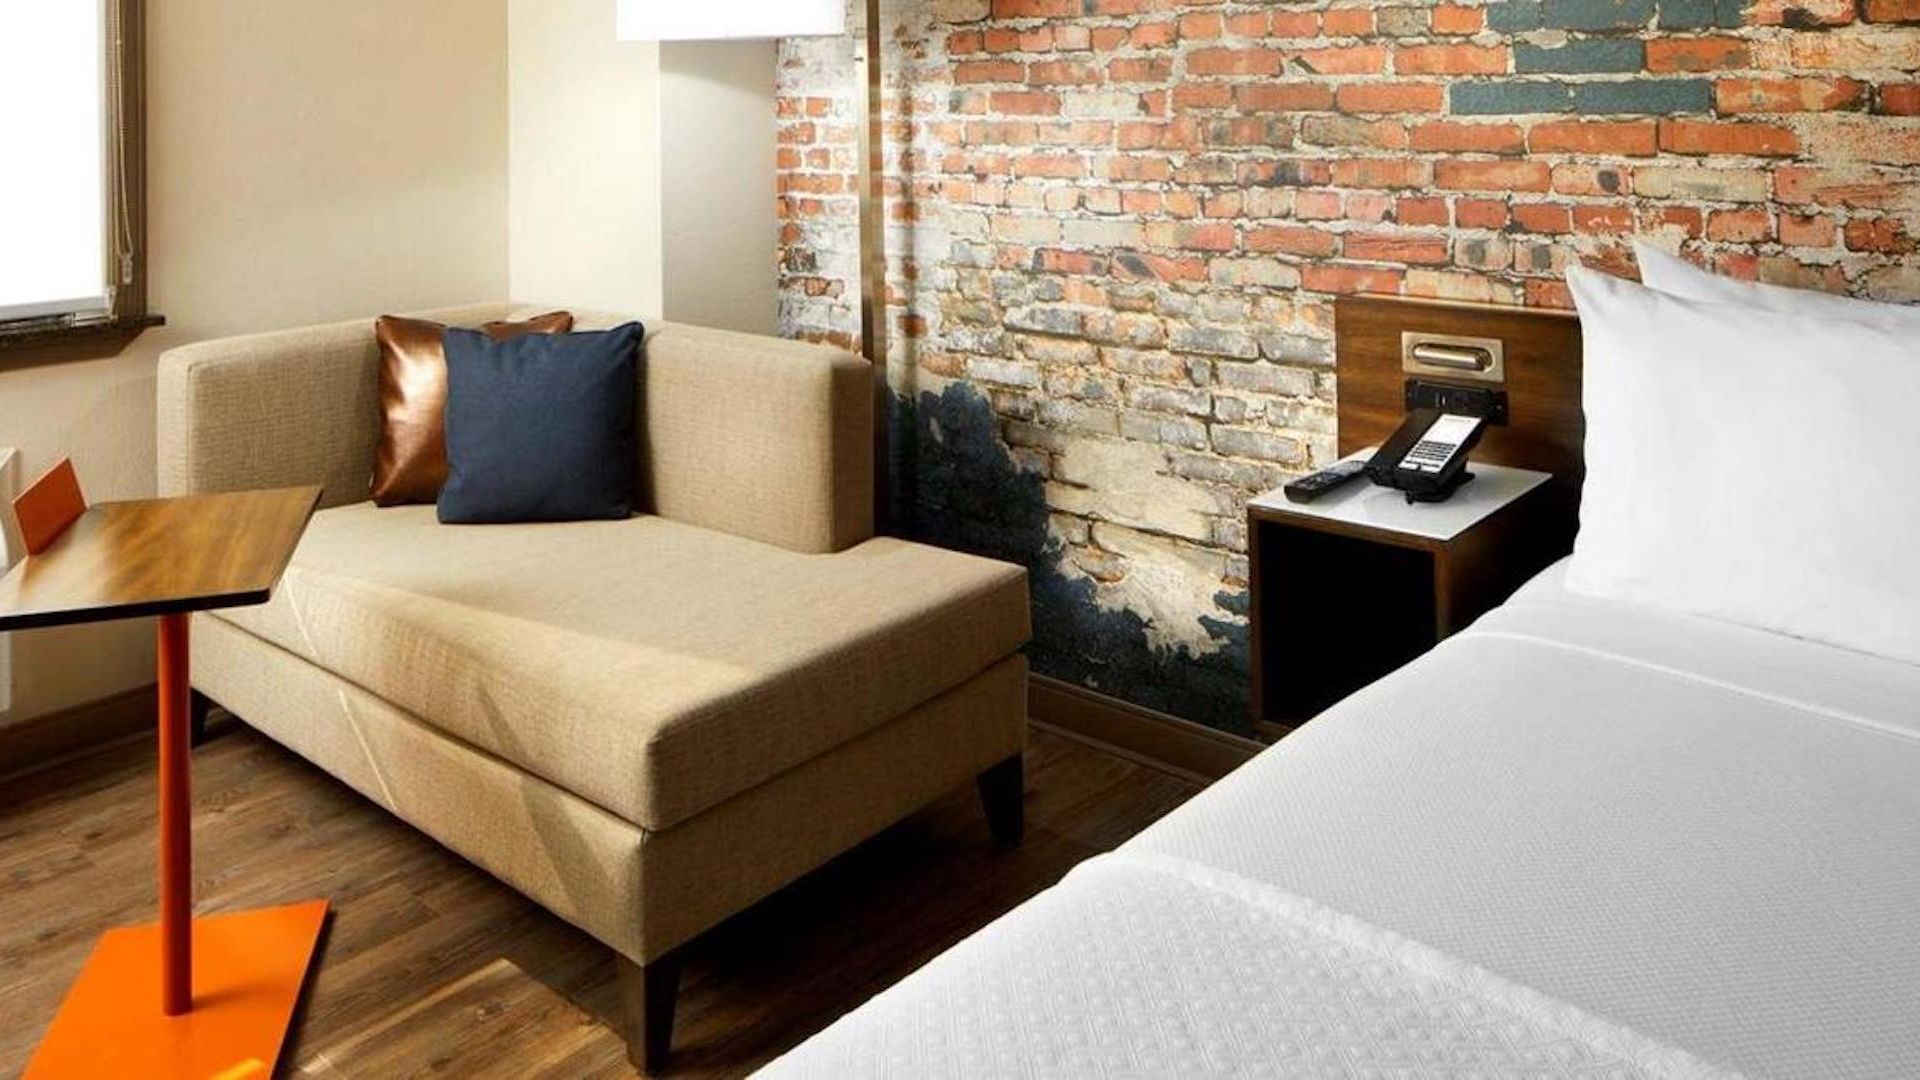 A Couch And A Table In A Room With A Brick Wall